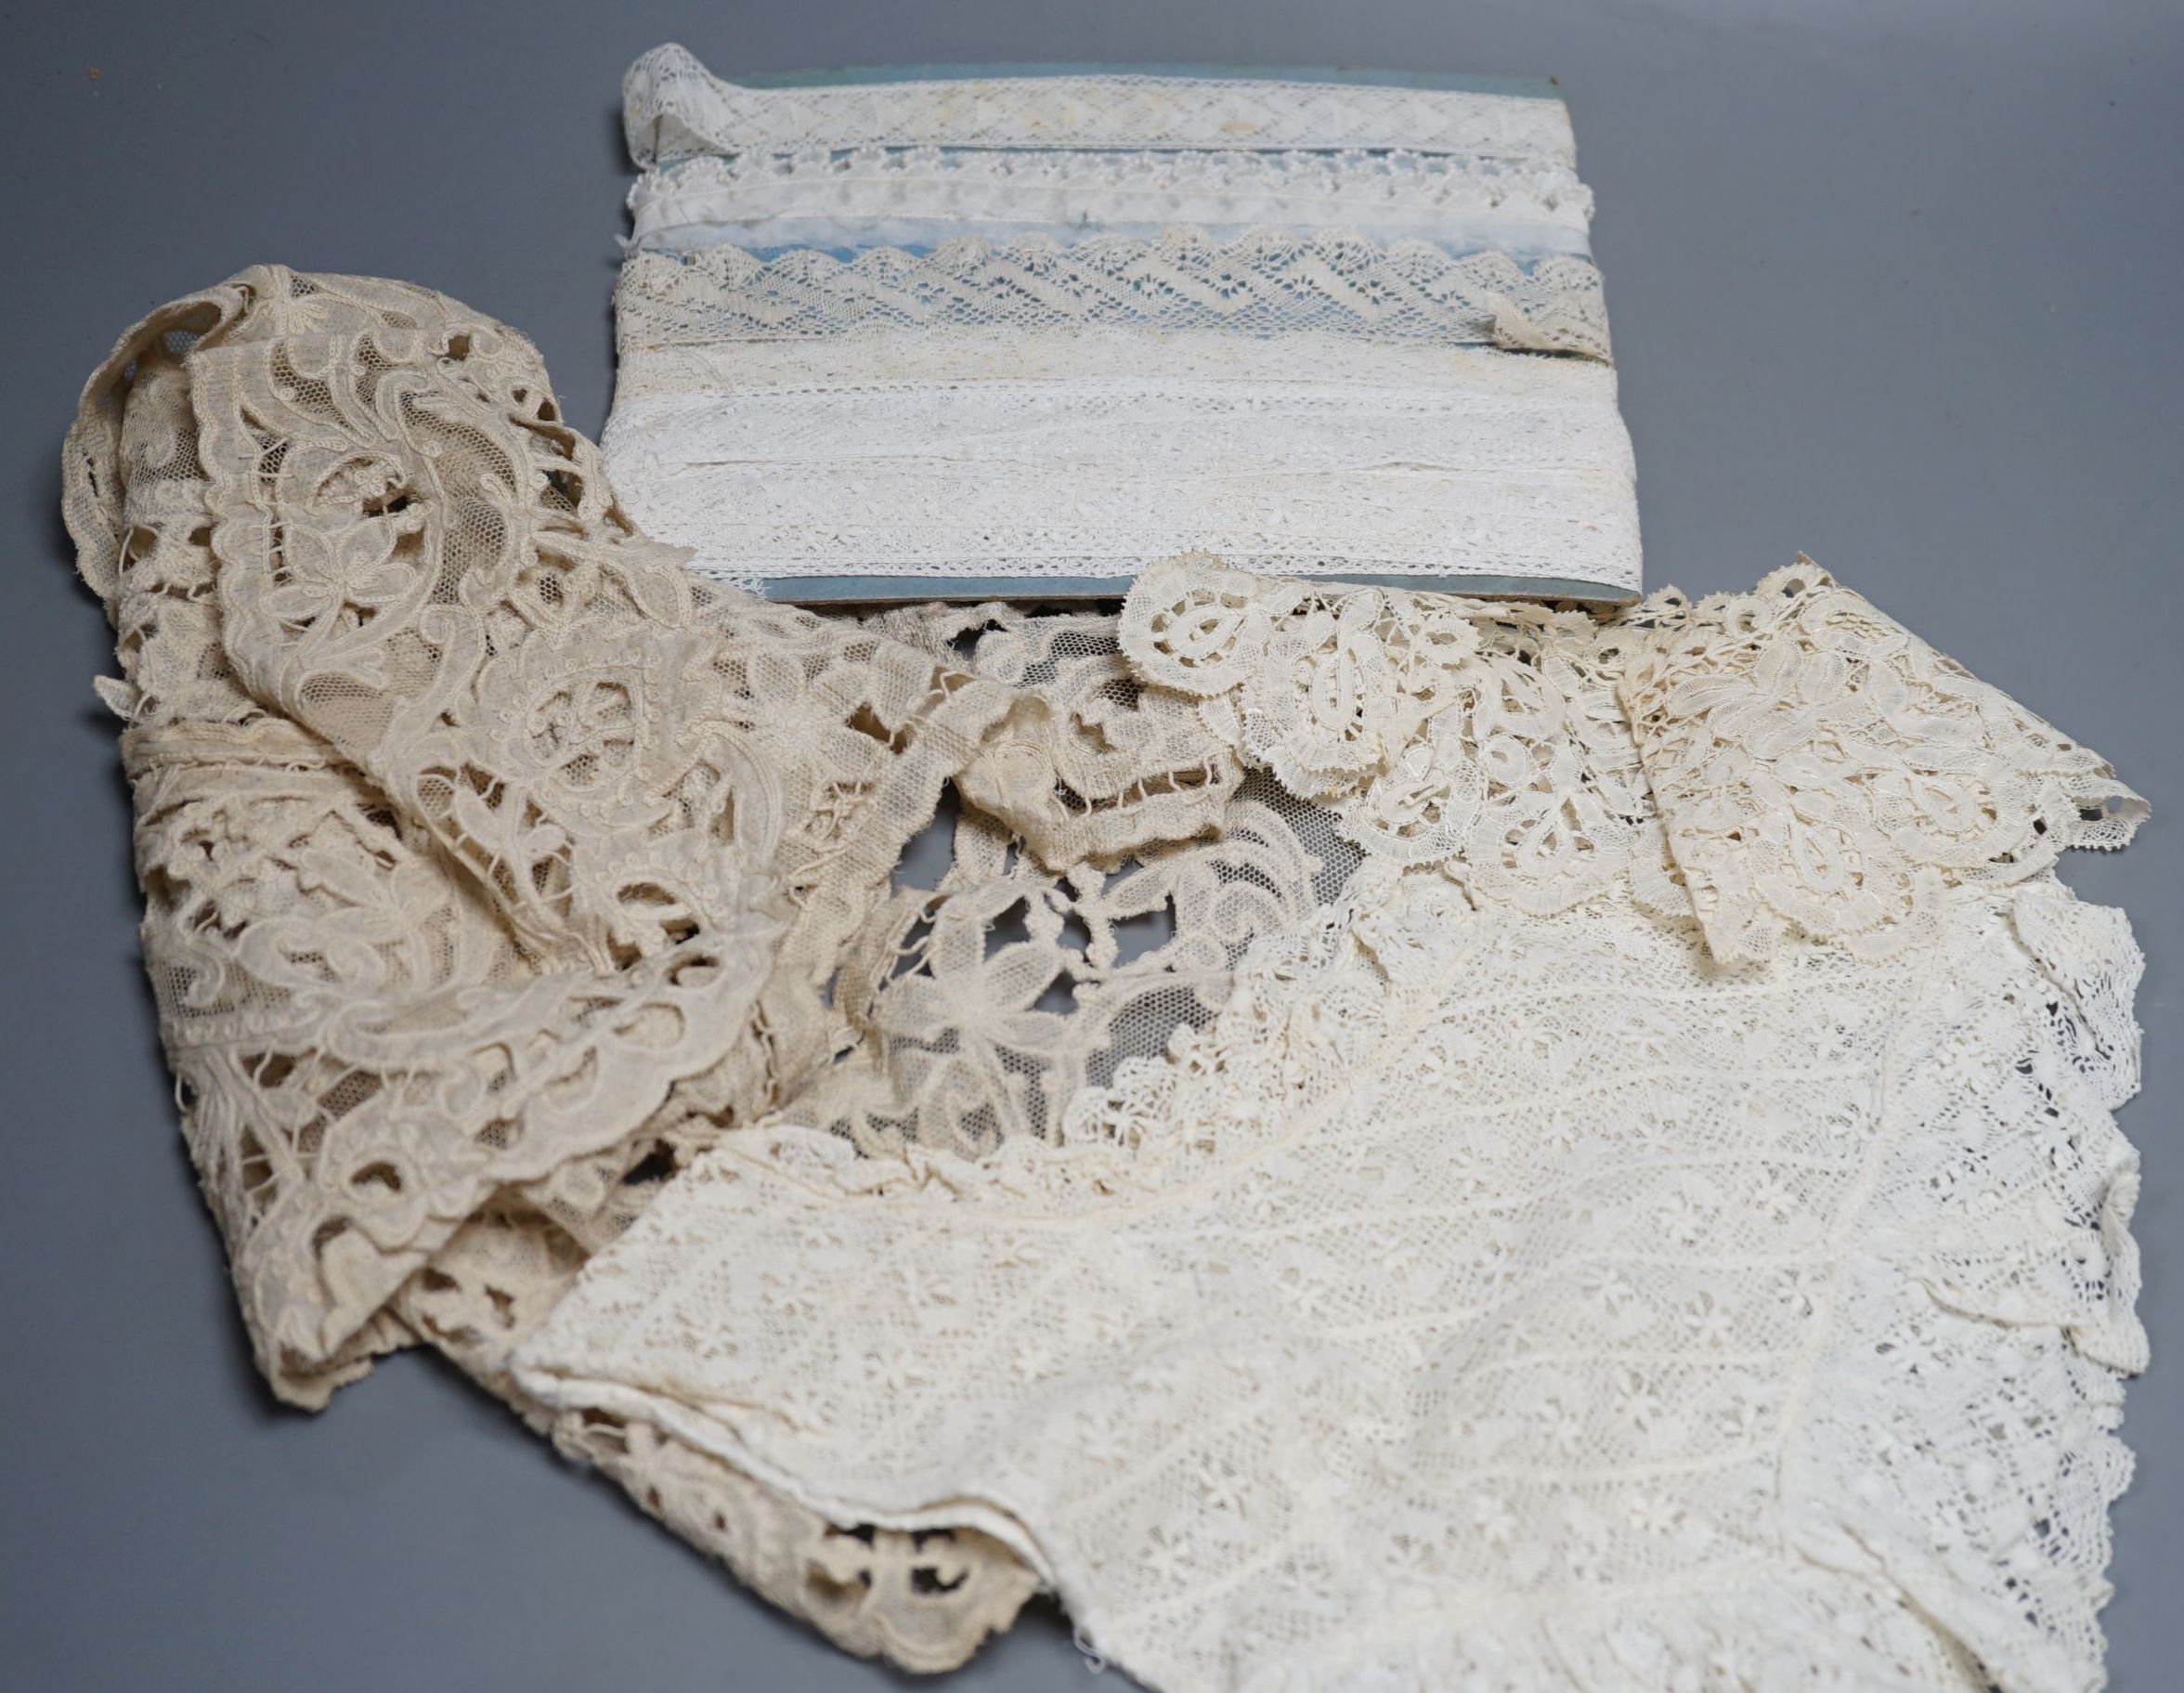 A lace bolero, a small collection of lace collars, trimmings etc